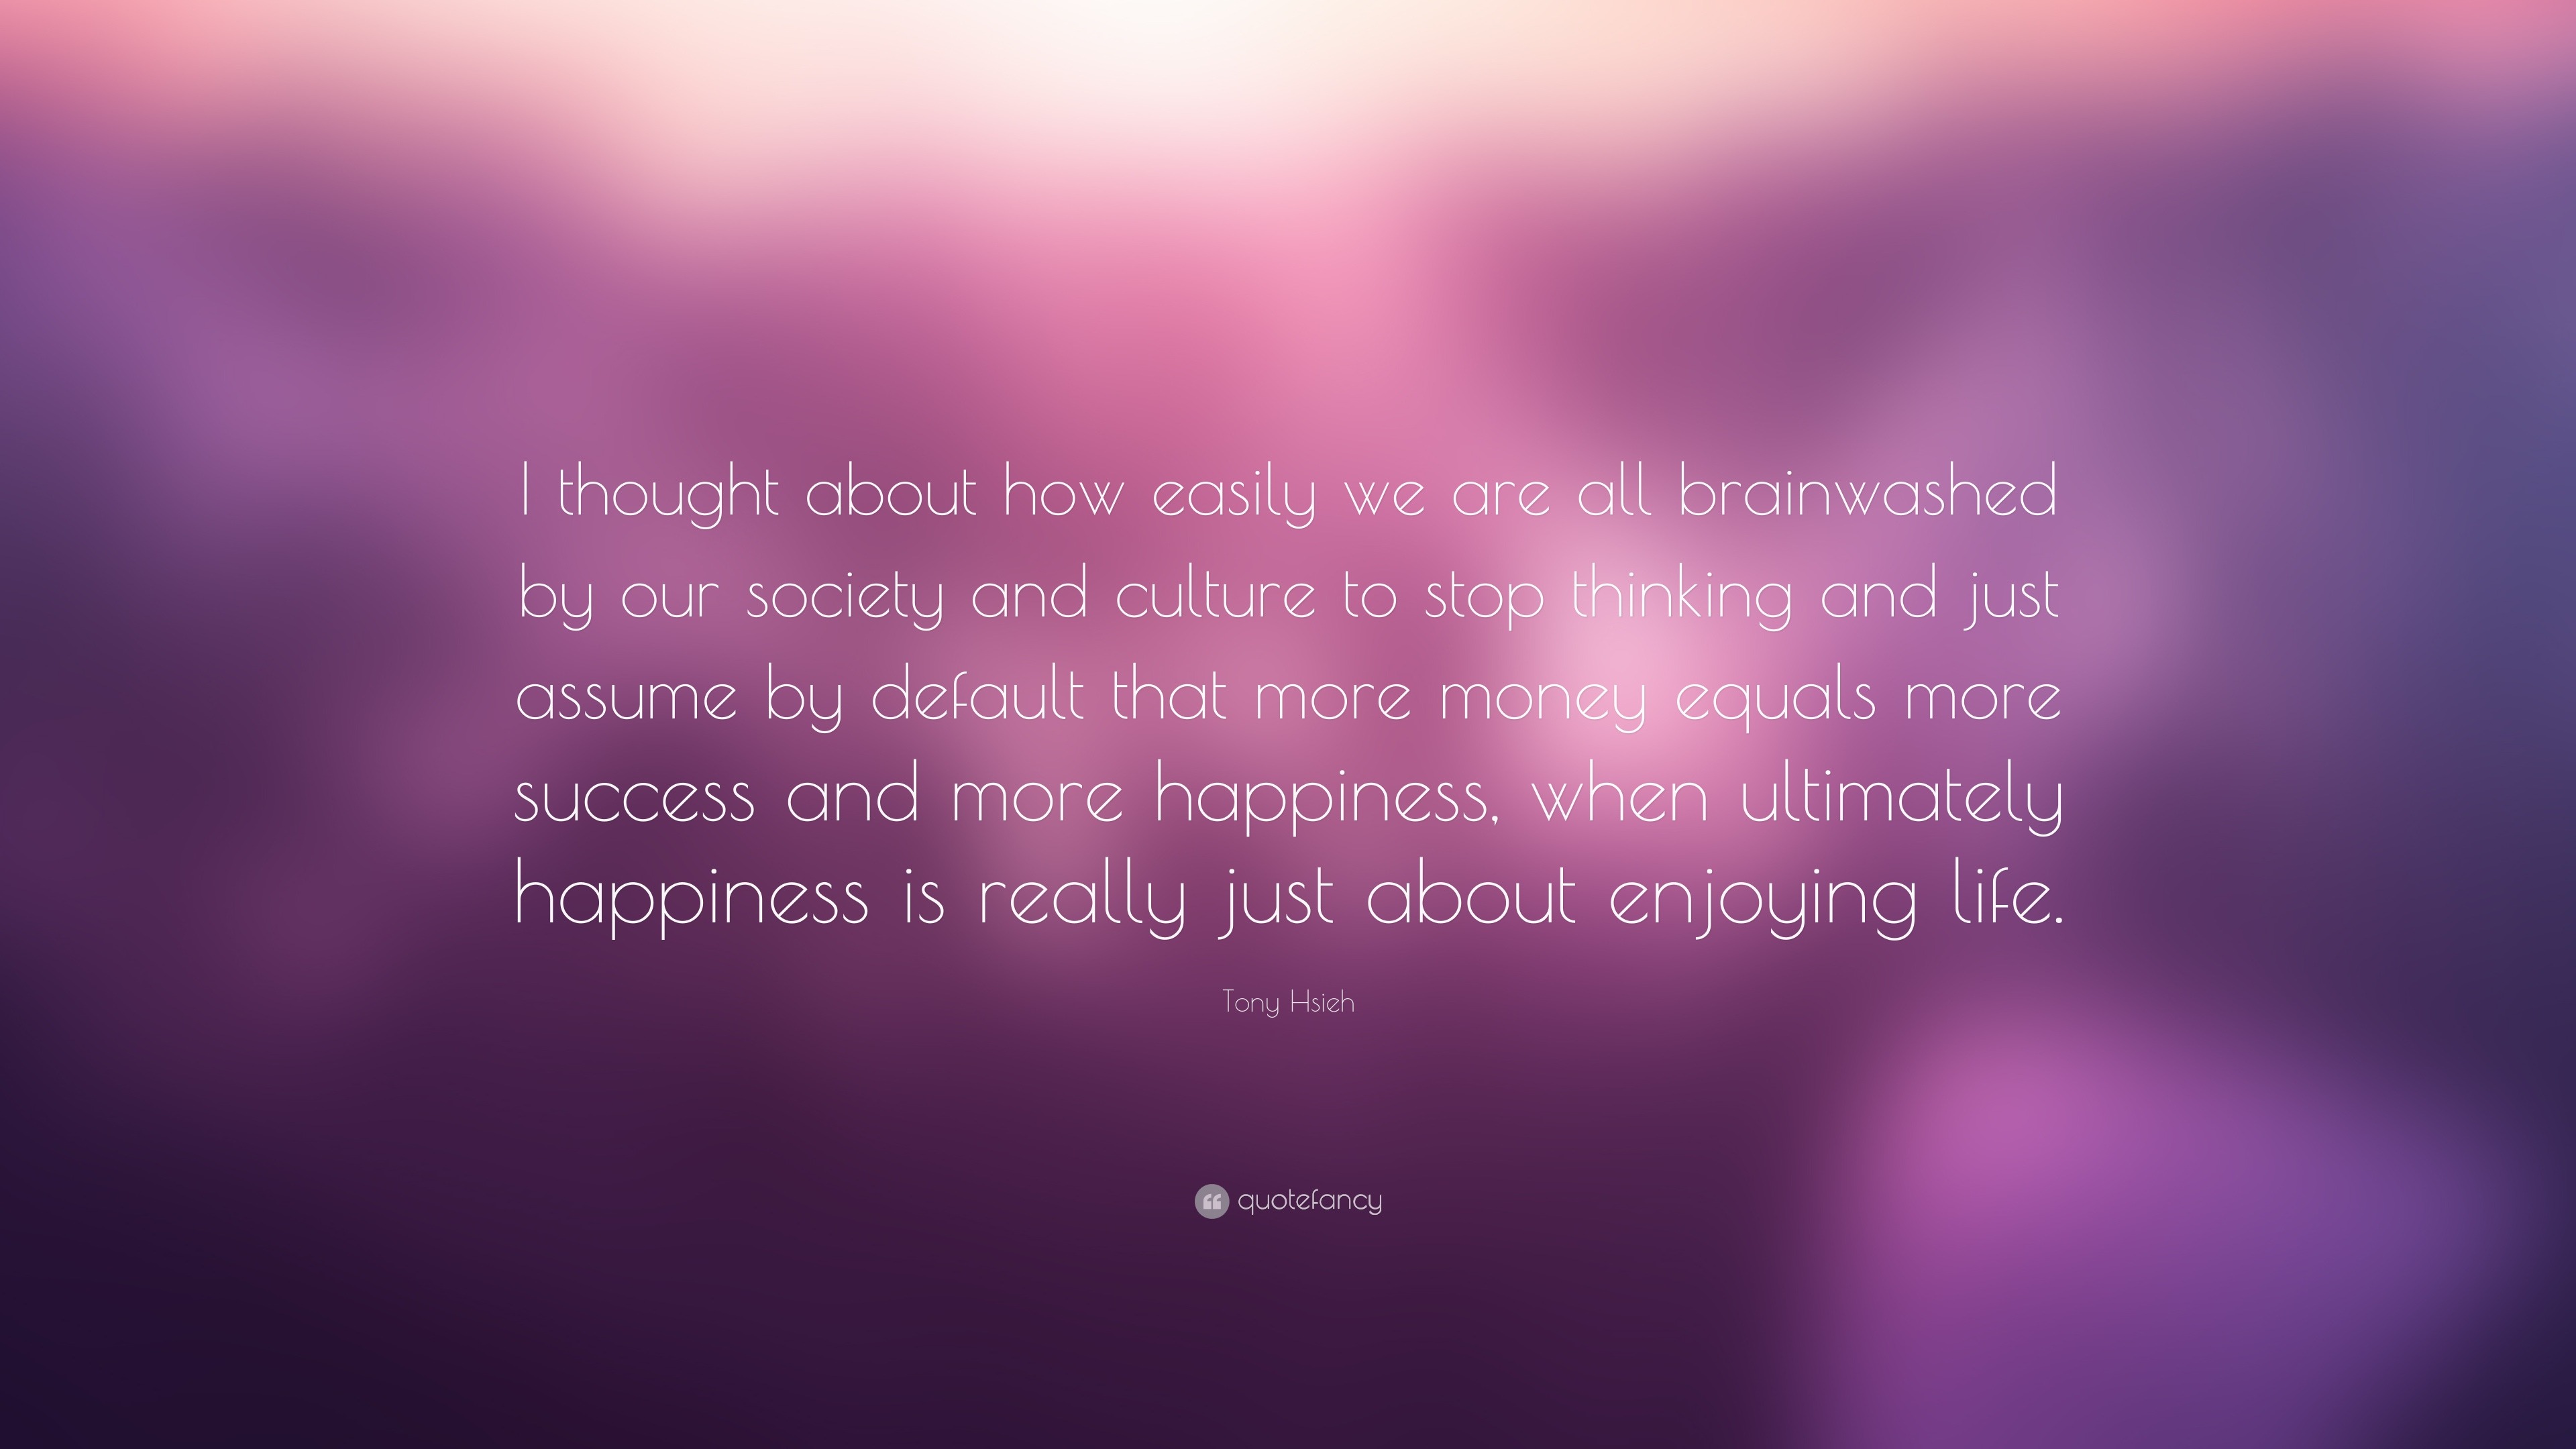 Tony Hsieh Quote: “I thought about how easily we are all brainwashed by ...